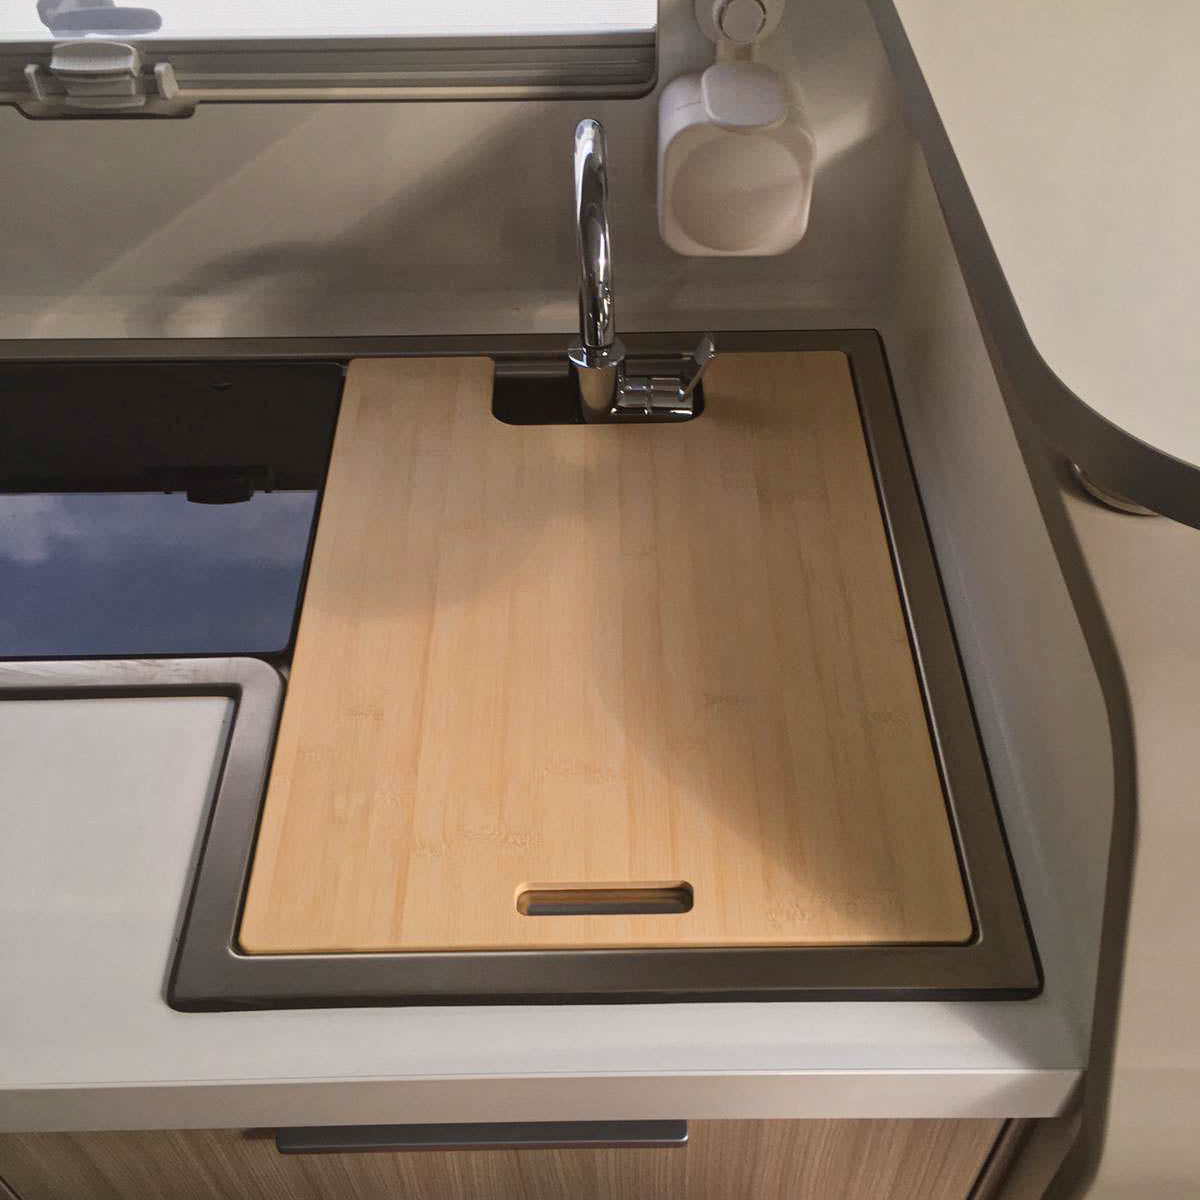 Cutting board with sink cover for Sunliving models